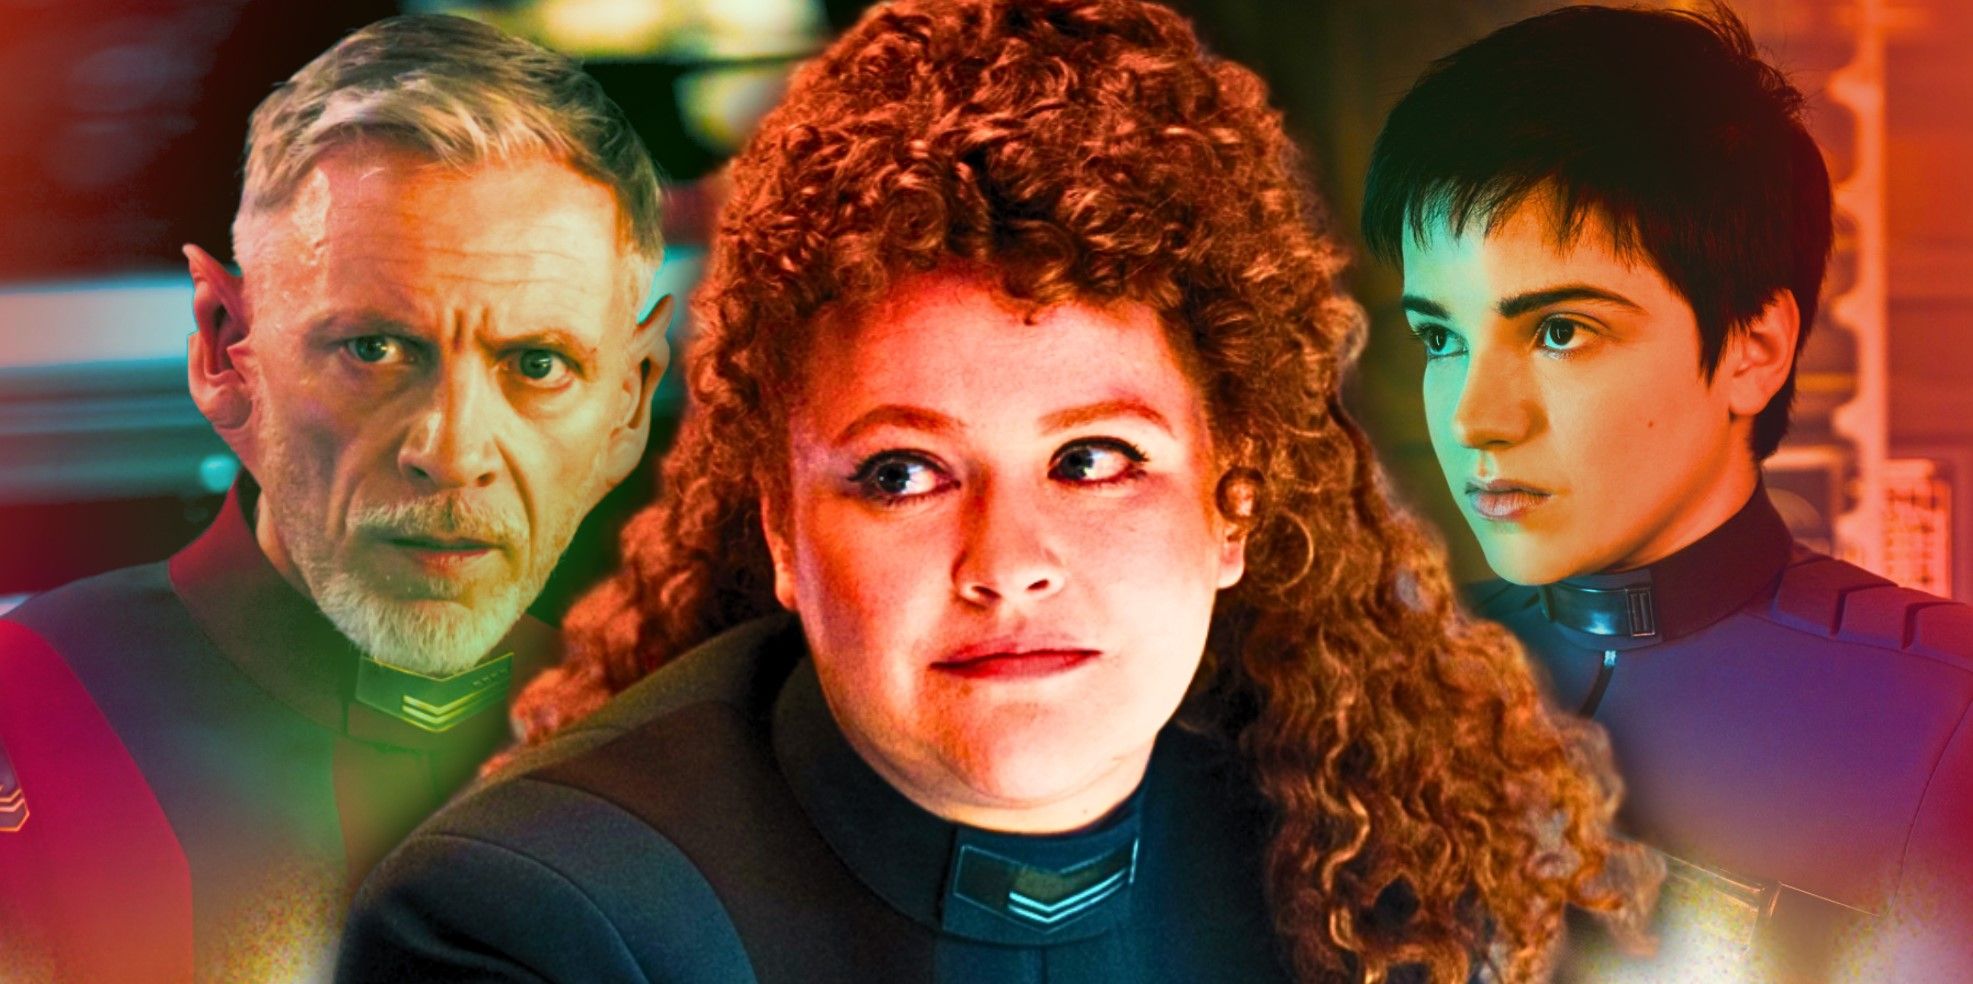 Commander Rayner, Lt Tilly, and Ensign Adira Tal from Star Trek Discovery